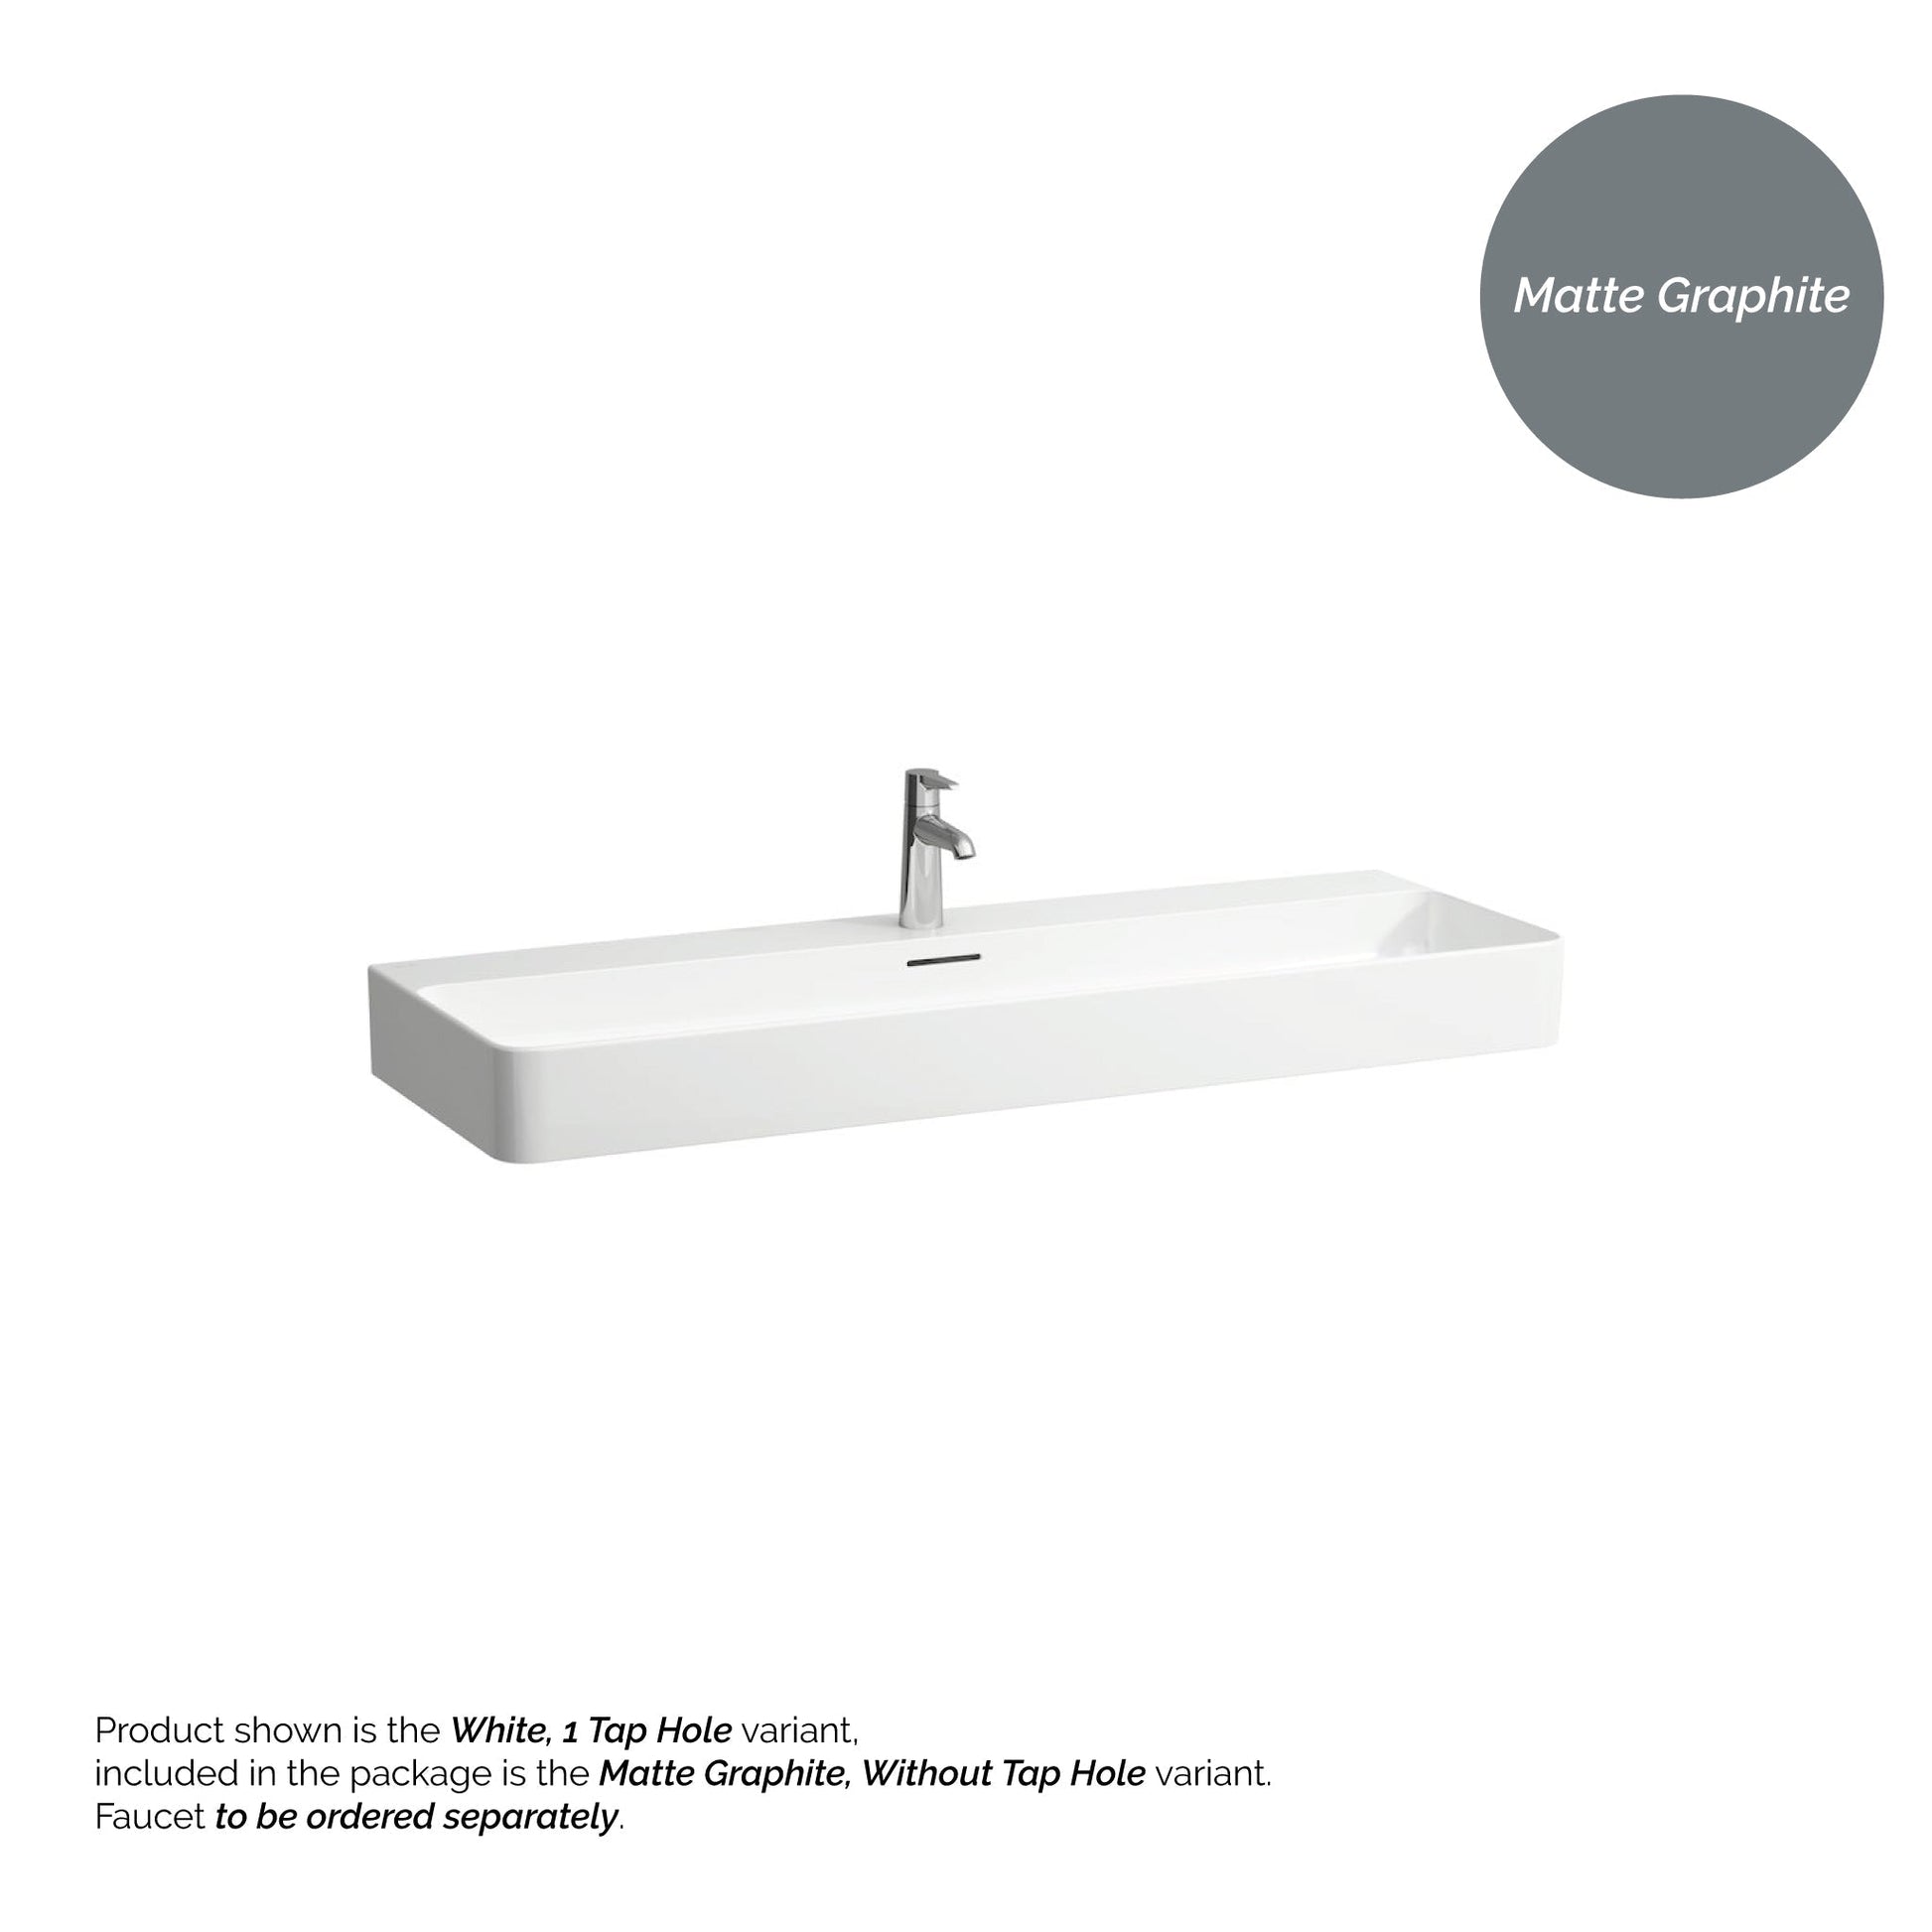 Laufen Val 47" x 17" Matte Graphite Ceramic Wall-Mounted Bathroom Sink Without Faucet Hole